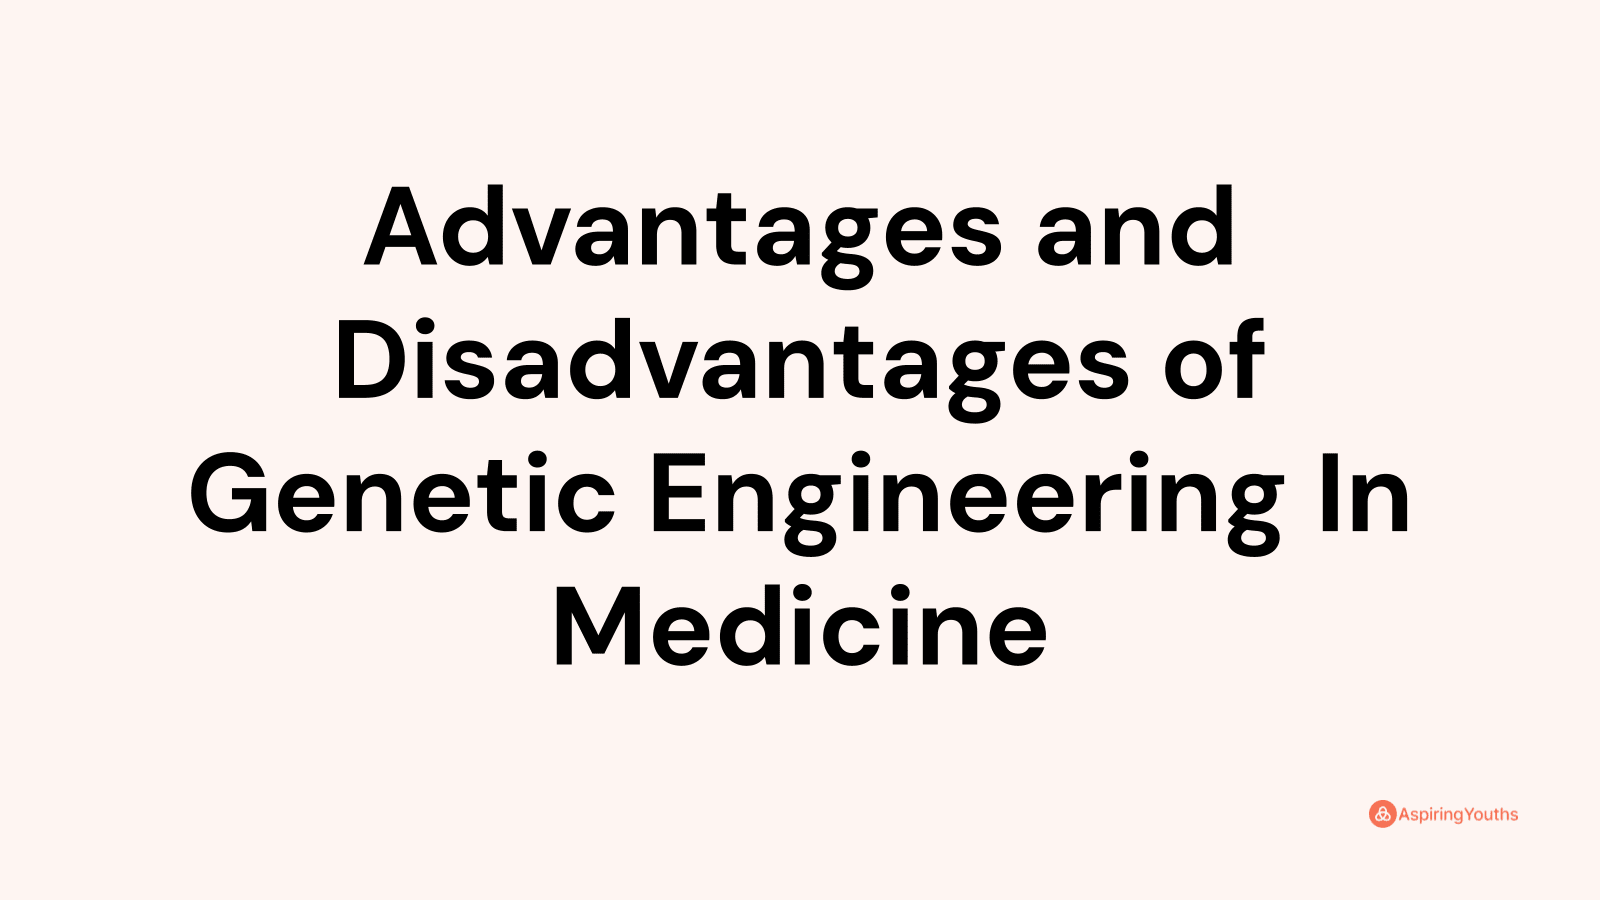 Advantages and disadvantages of Genetic Engineering In Medicine